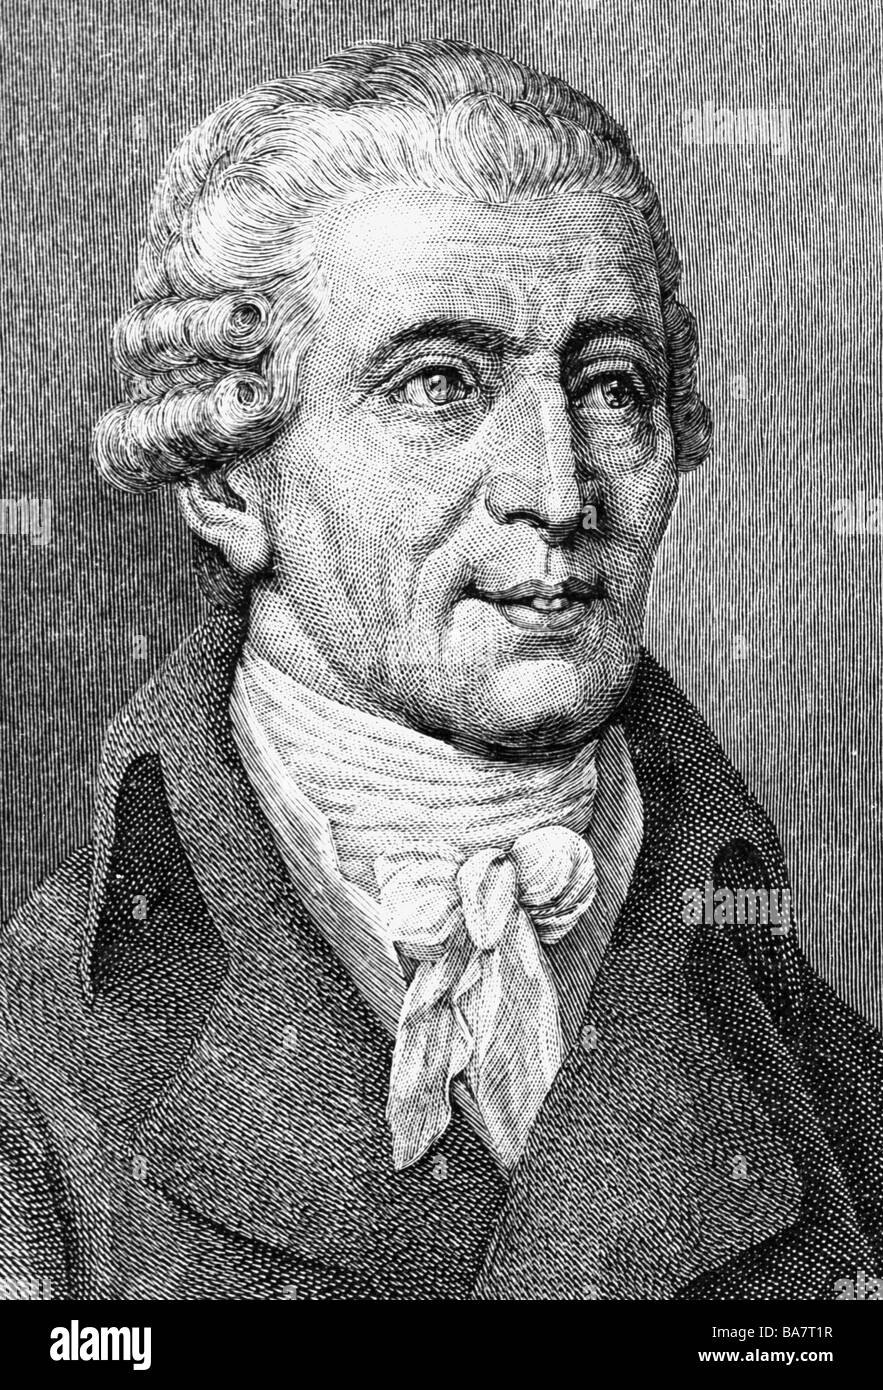 Haydn, Joseph, 31.3.1732 - 31.5.1809, Austrian composer, portrait, steel engraving, early 19th century, , Artist's Copyright has not to be cleared Stock Photo